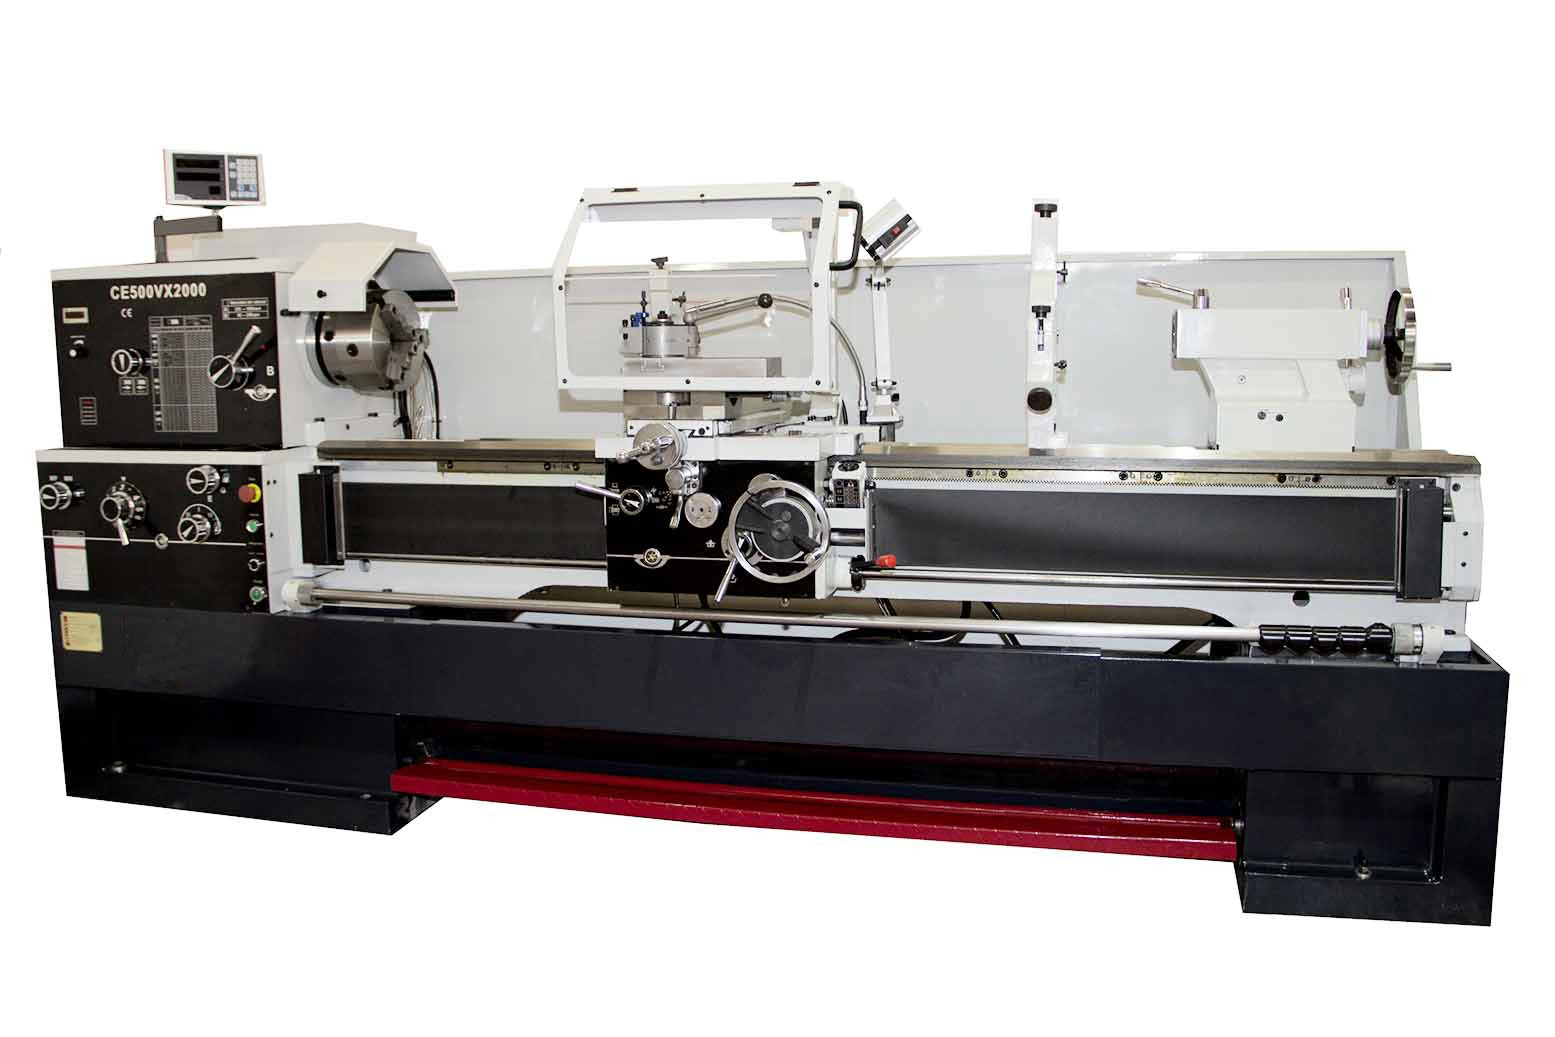 VARIABLE SPEED PARALLEL LATHE CE500X2000